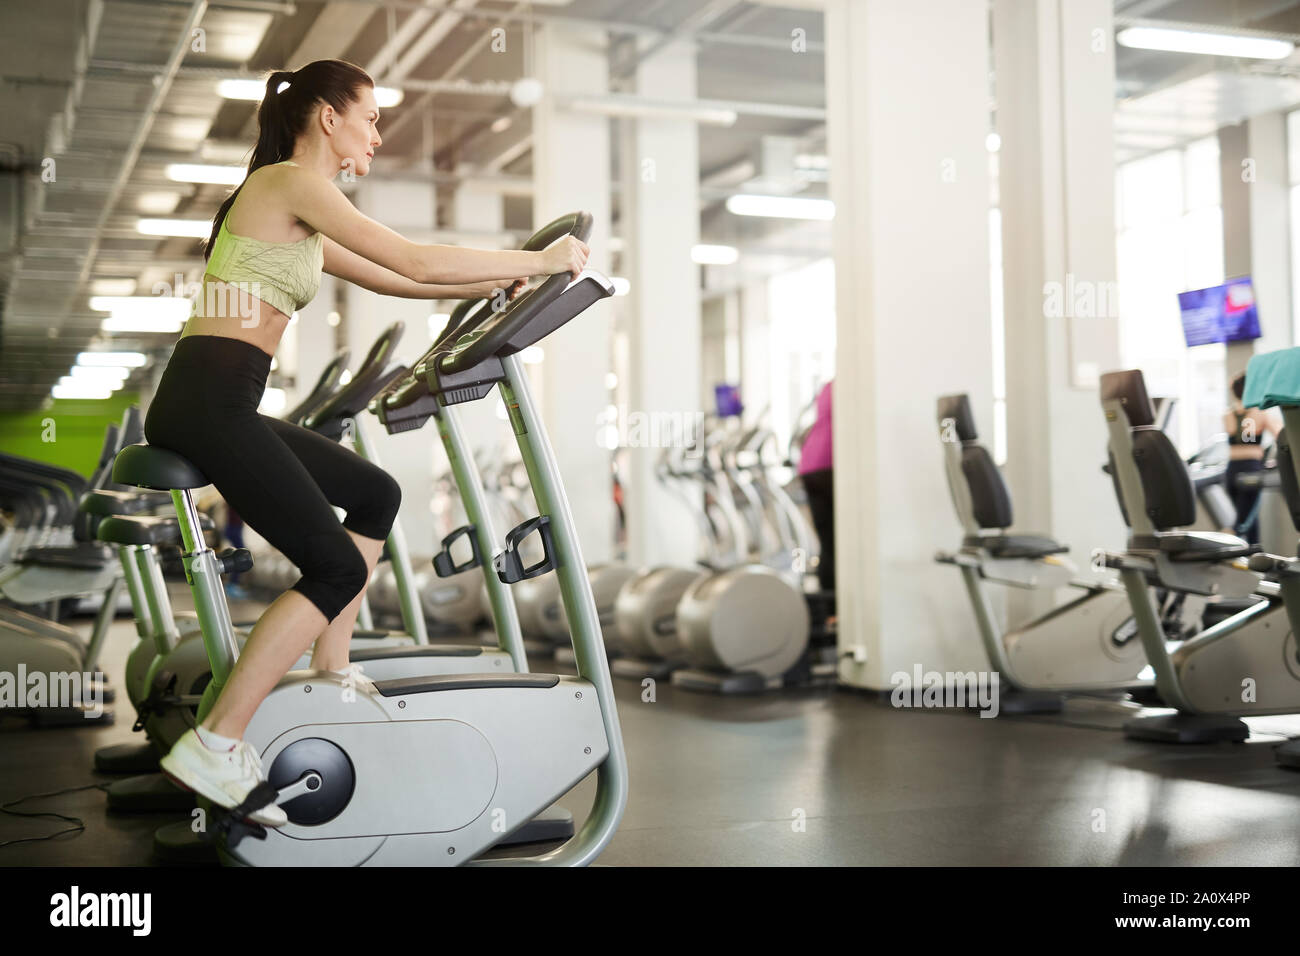 Side view portrait of fit young woman on exercise bike enjoying cardio workout alone in empty gym, copy space Stock Photo